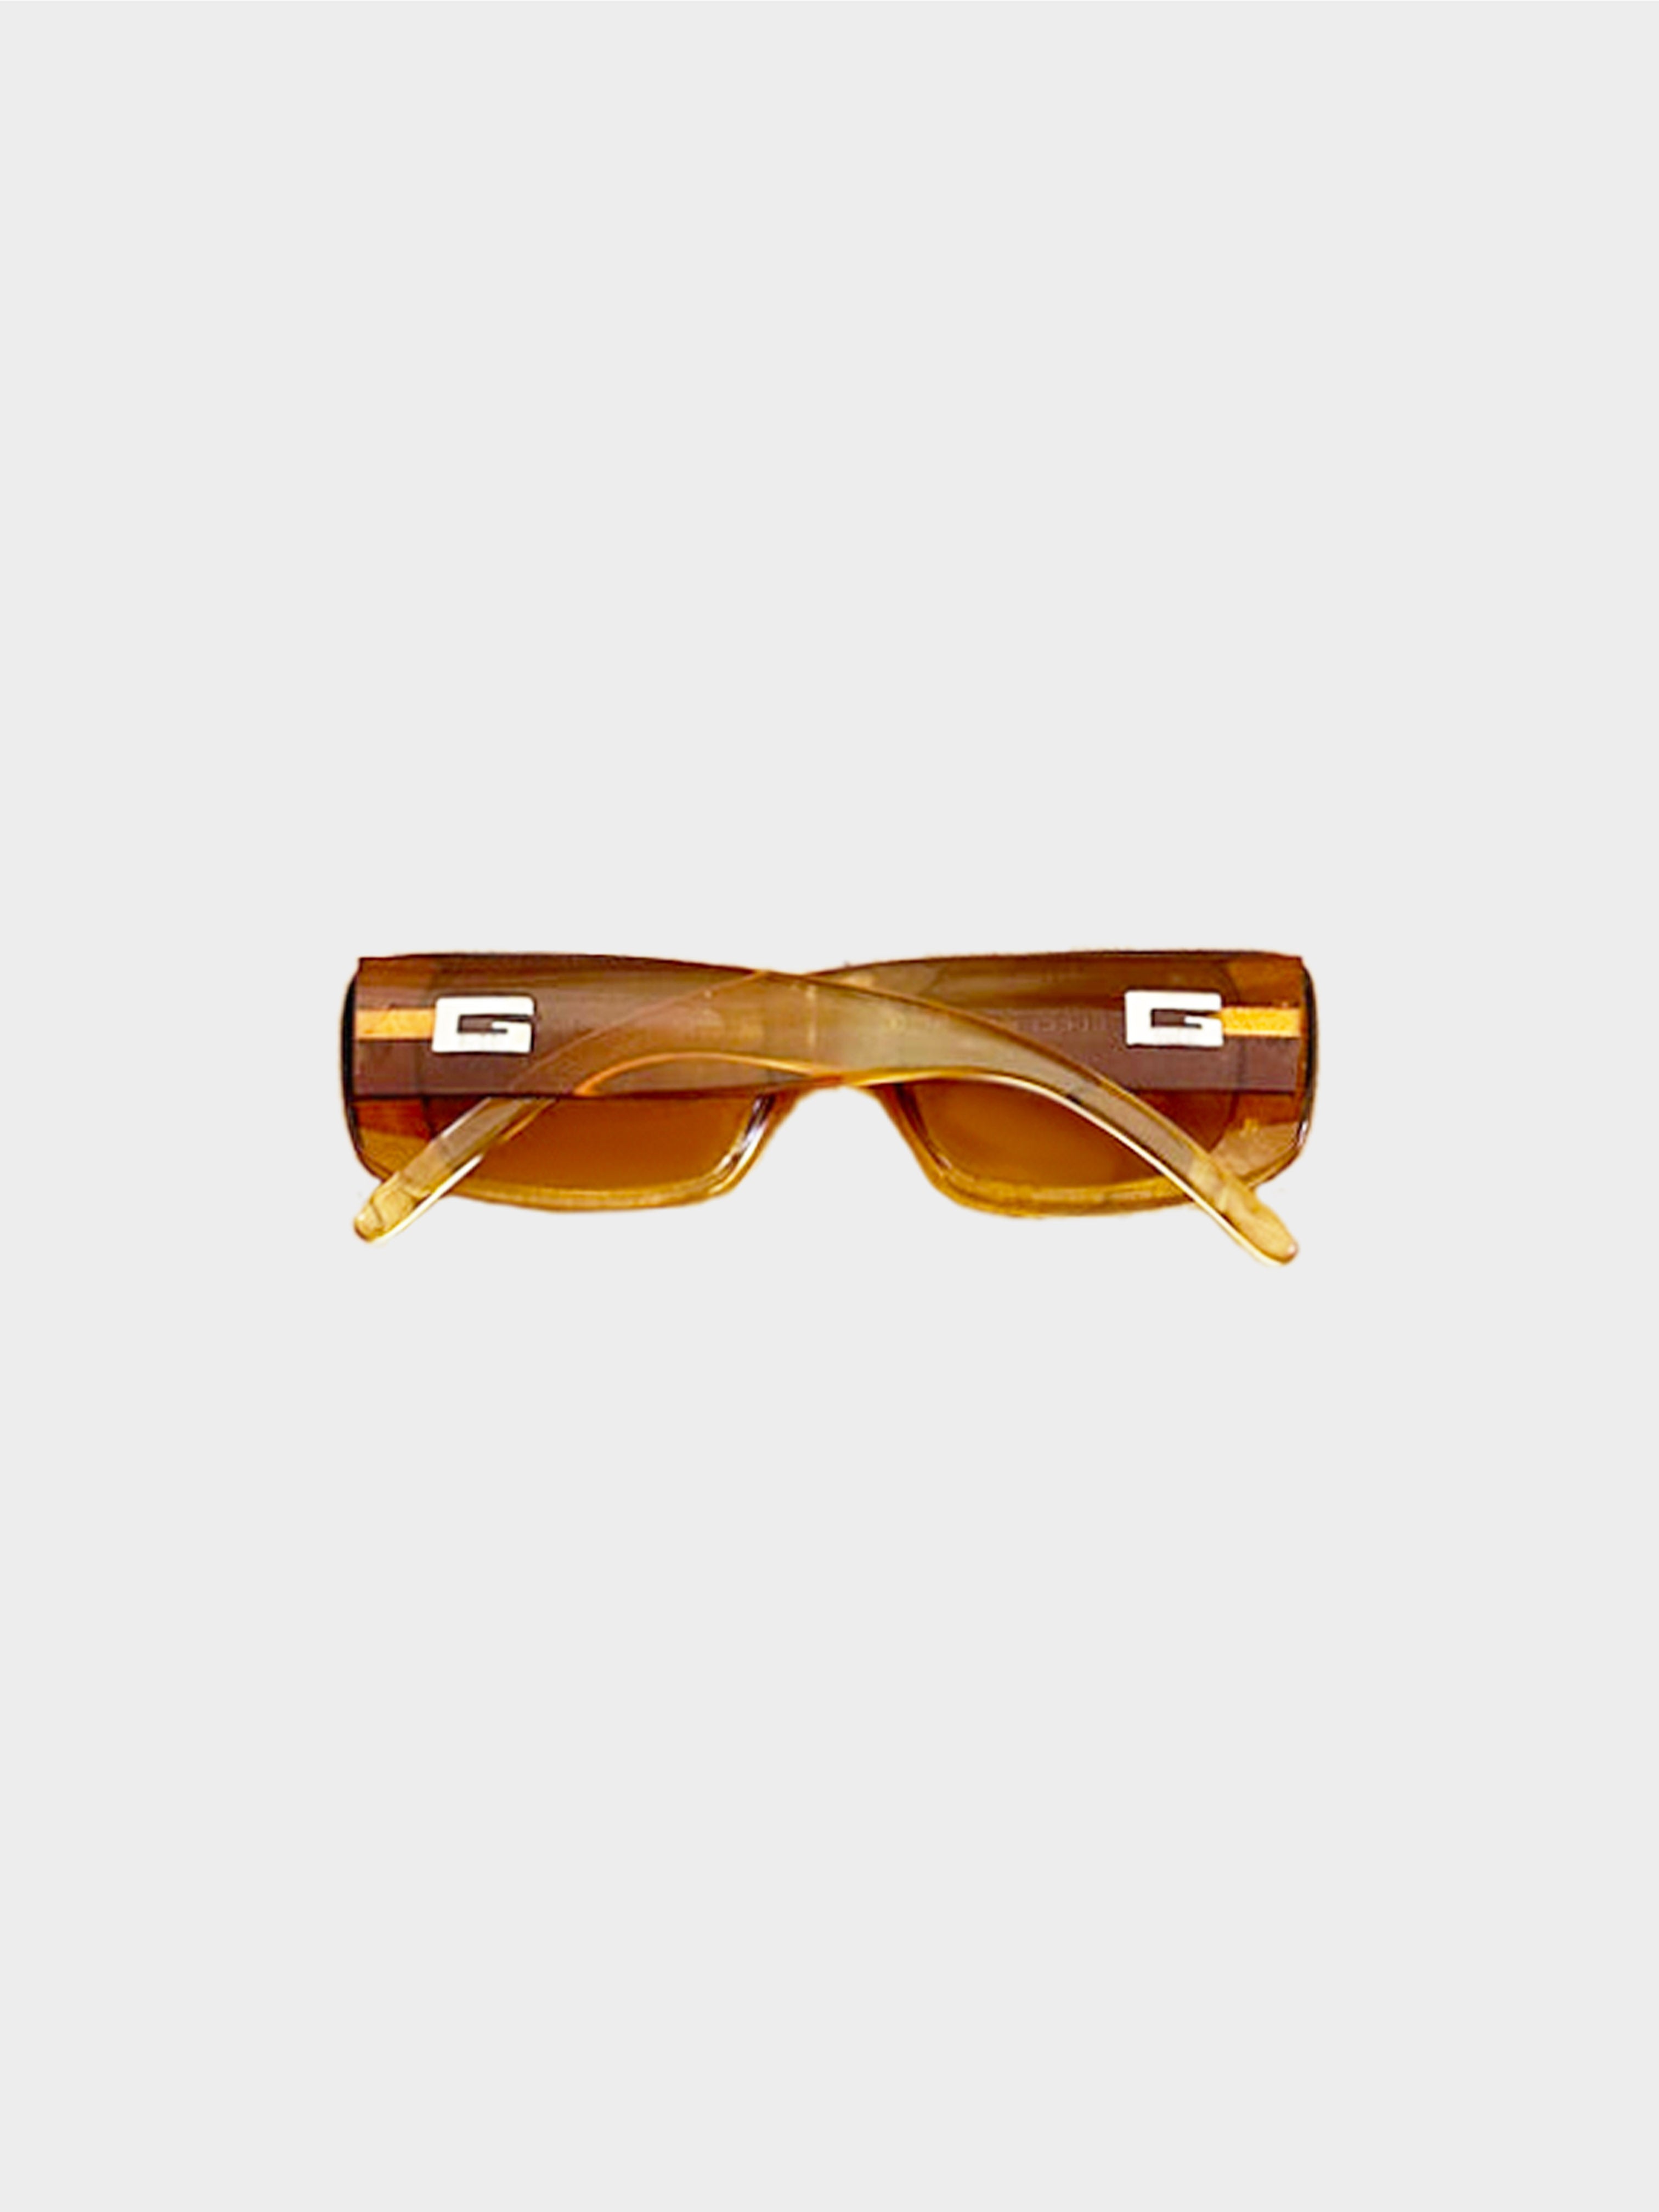 Gucci by Tom Ford 1990s Vintage Brown Ombre Sunglasses